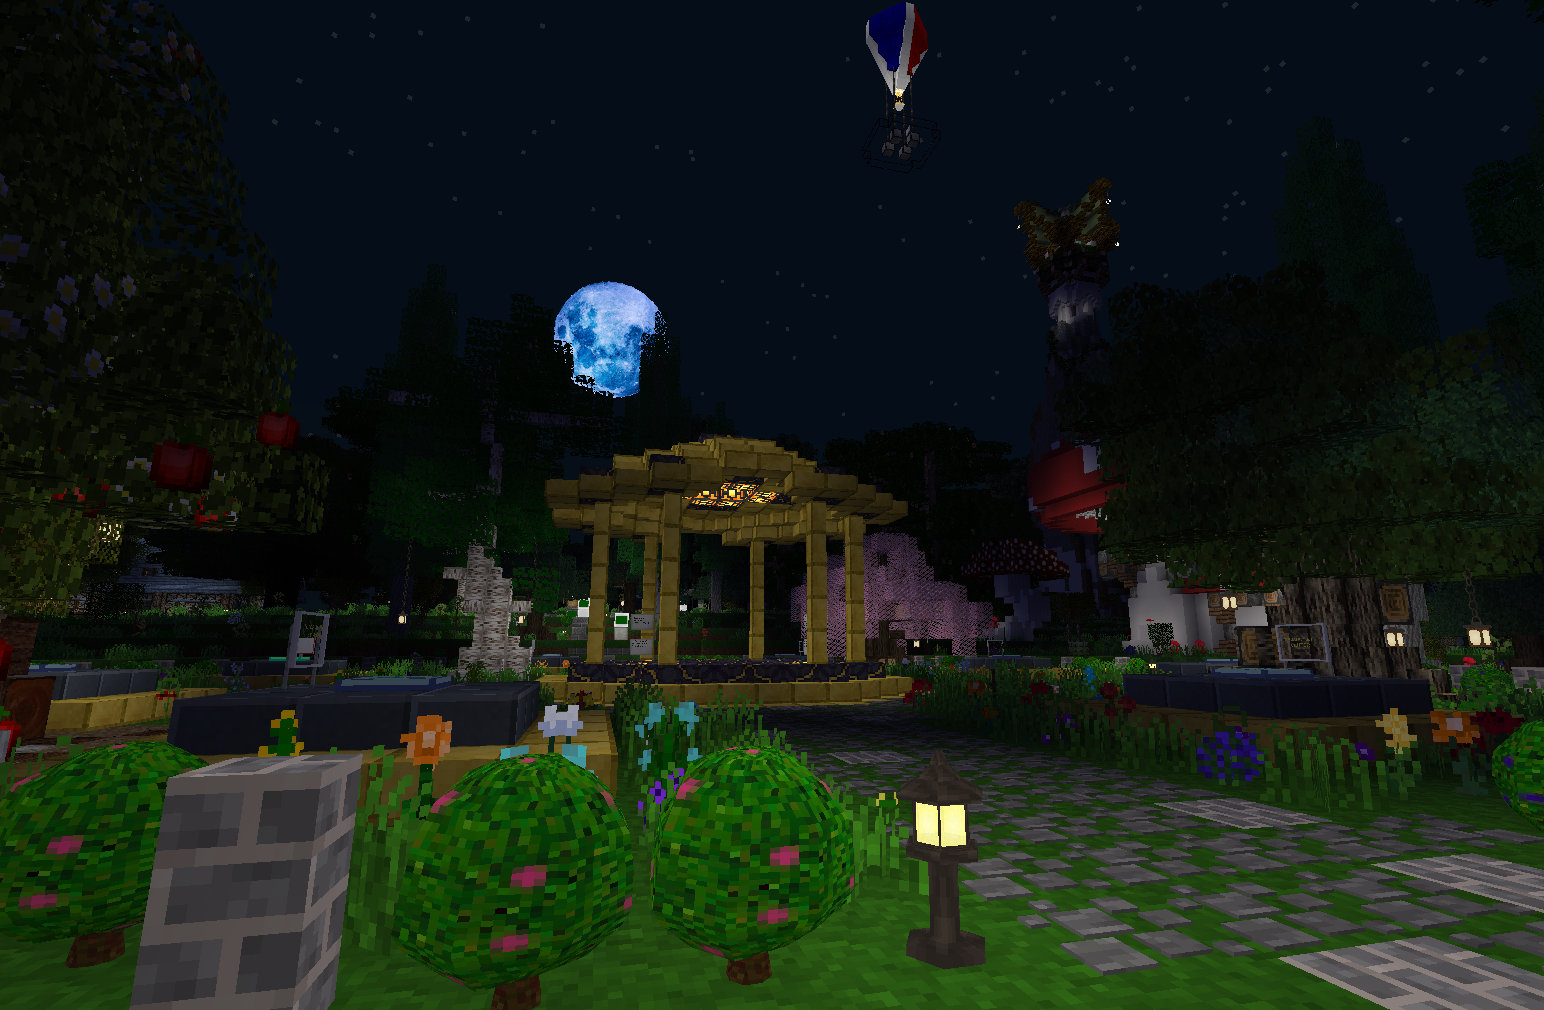 <a target='_blank' href='https://map.wunderwelt.one/#!/map/0/12/8075/4940'>Spawn</a> at night